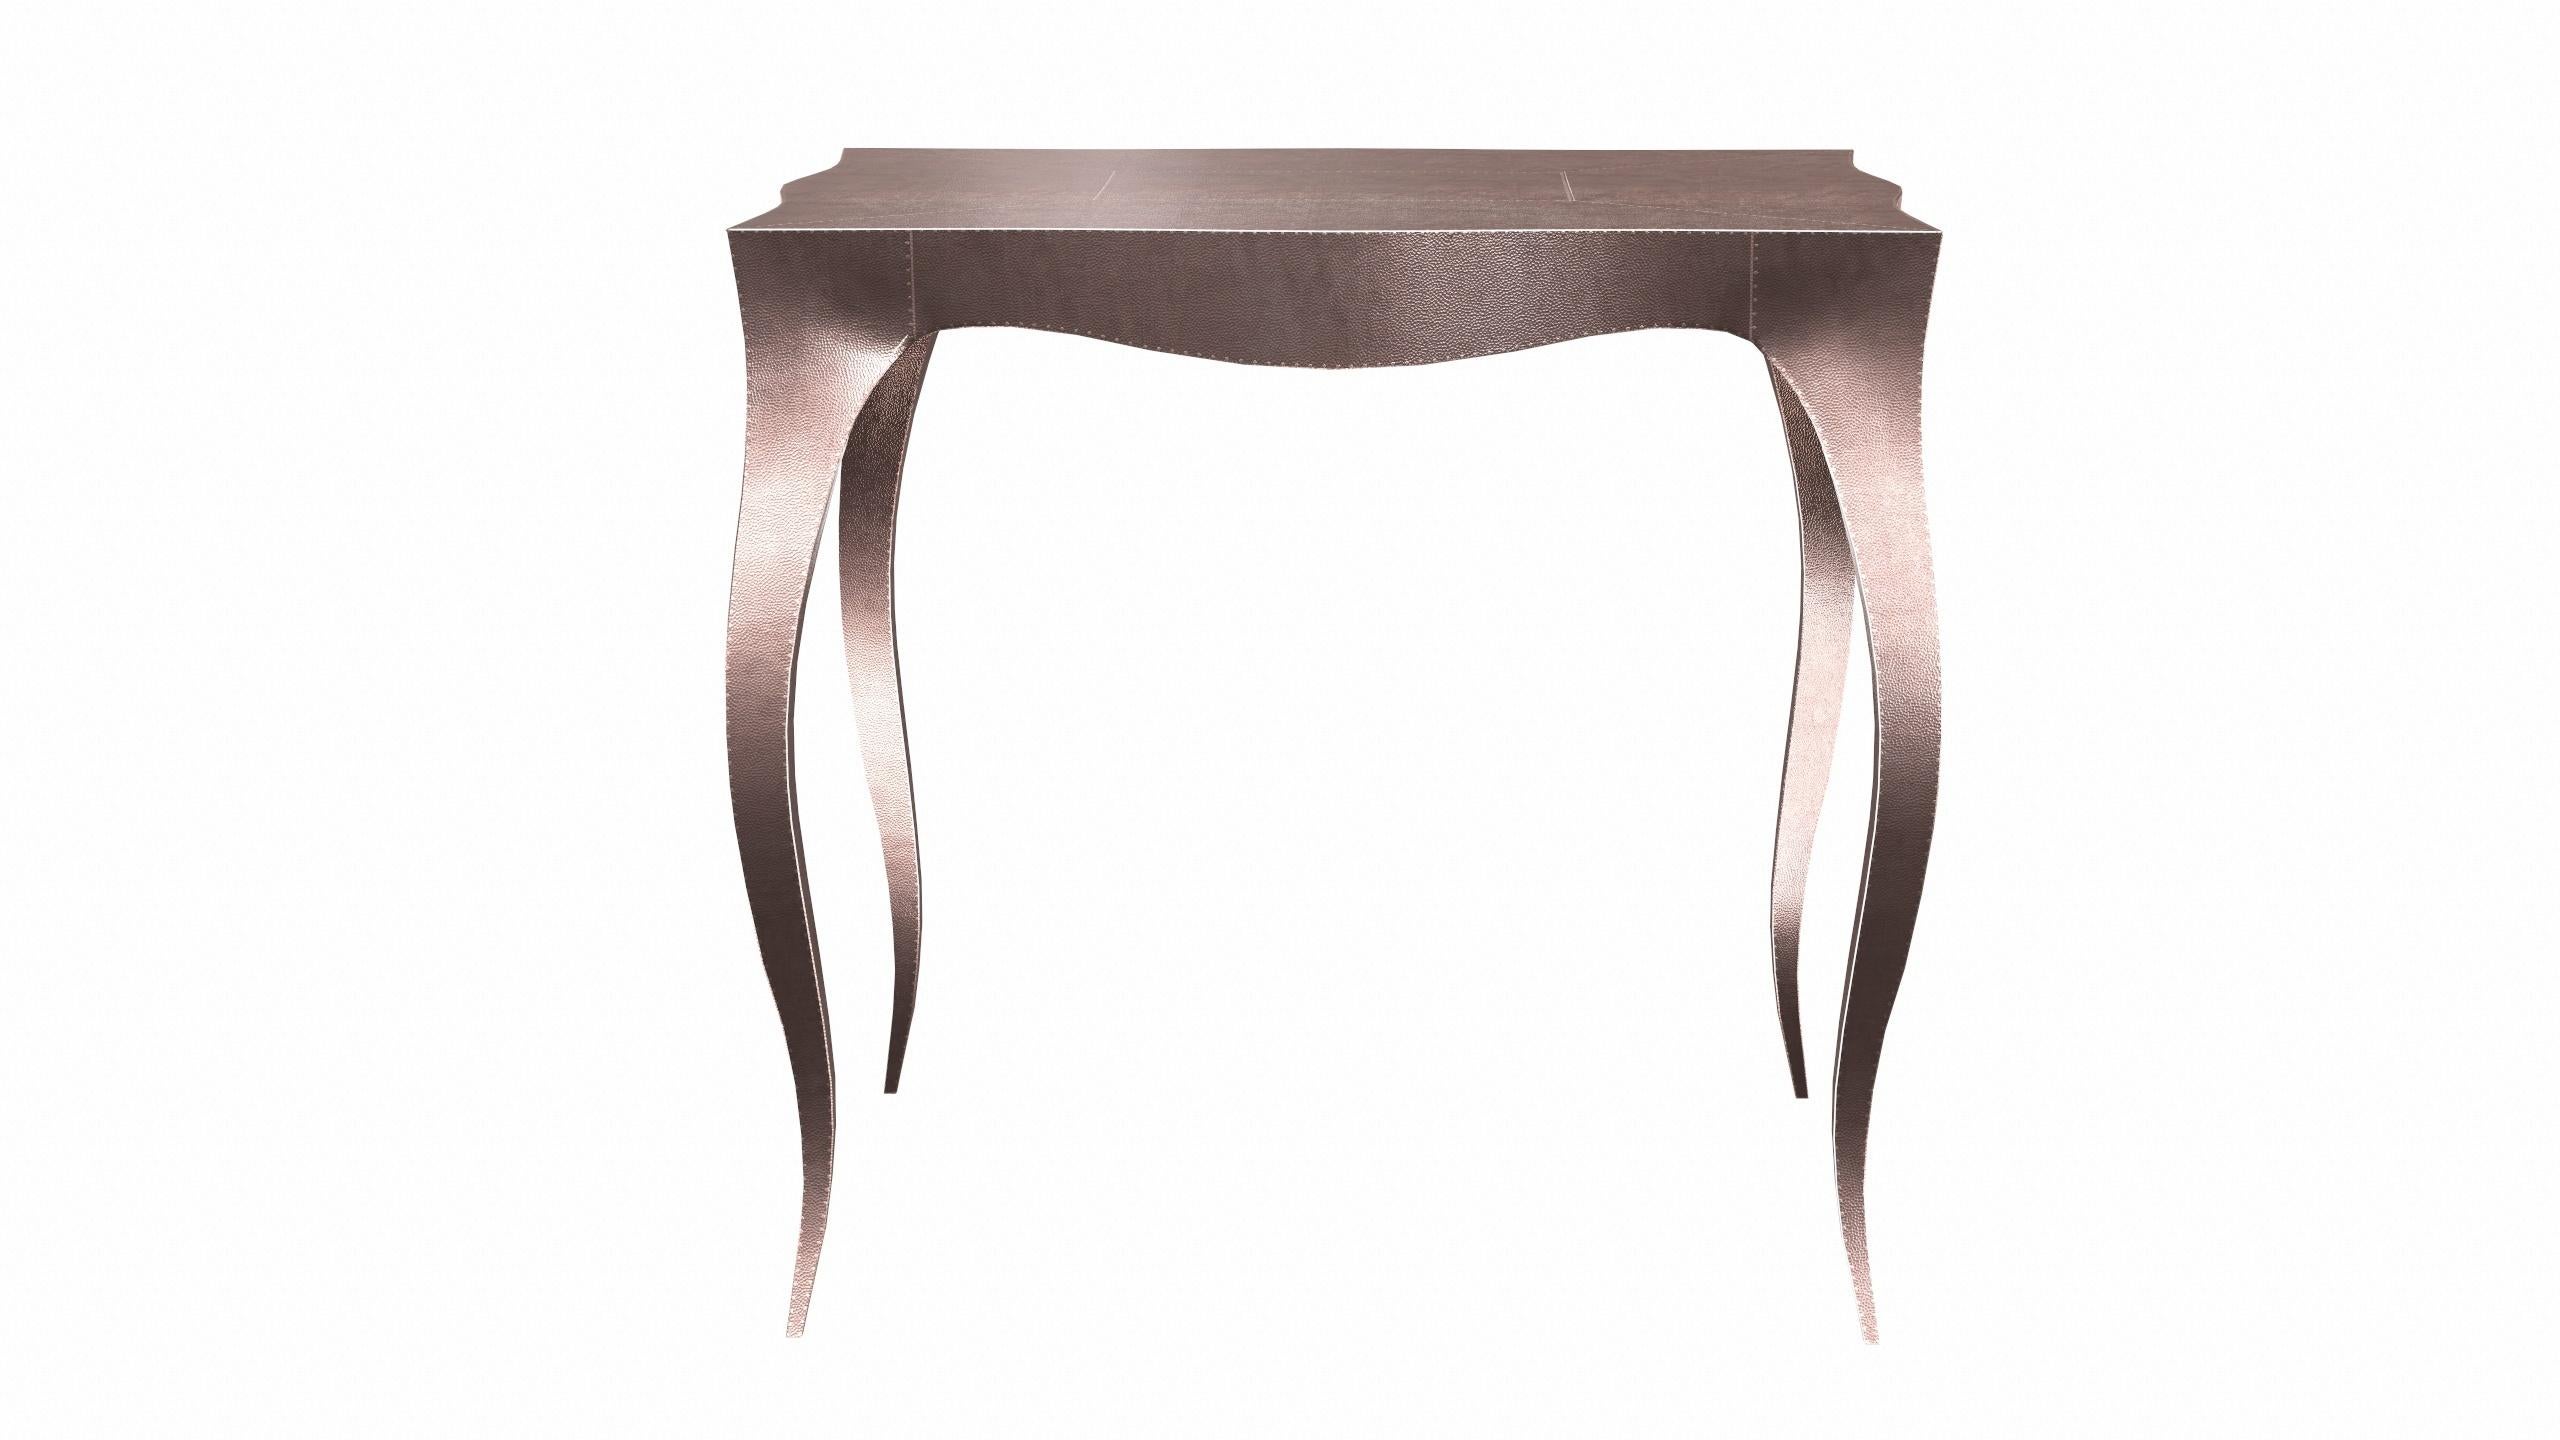 Metal Louise Art Deco Center Tables Mid. Hammered Copper by Paul Mathieu  For Sale